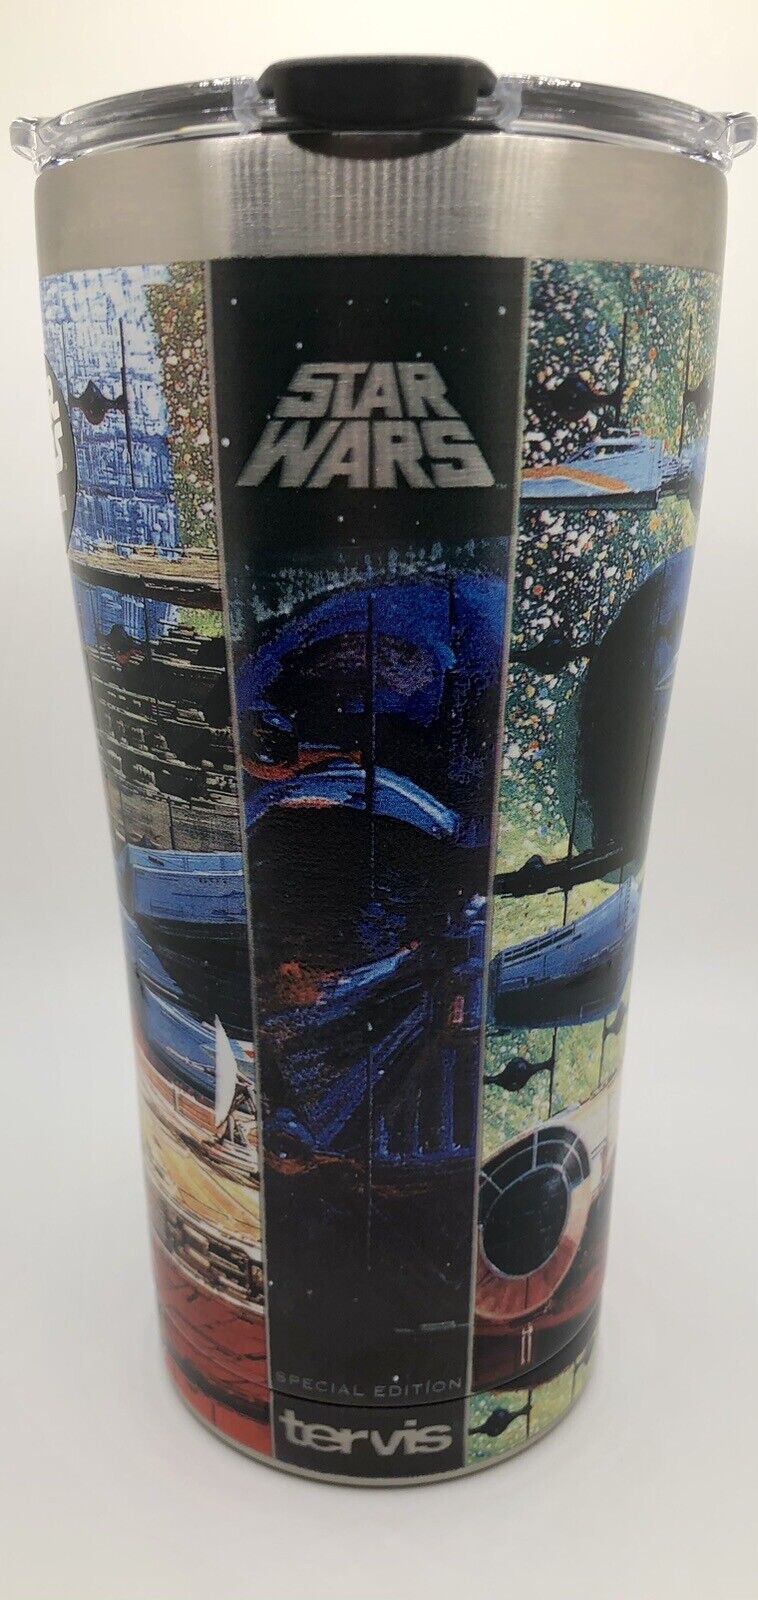 NEW 2019 Special Edition Tervis Star Wars Tumbler Stainless Steel 20 oz. T1-0918